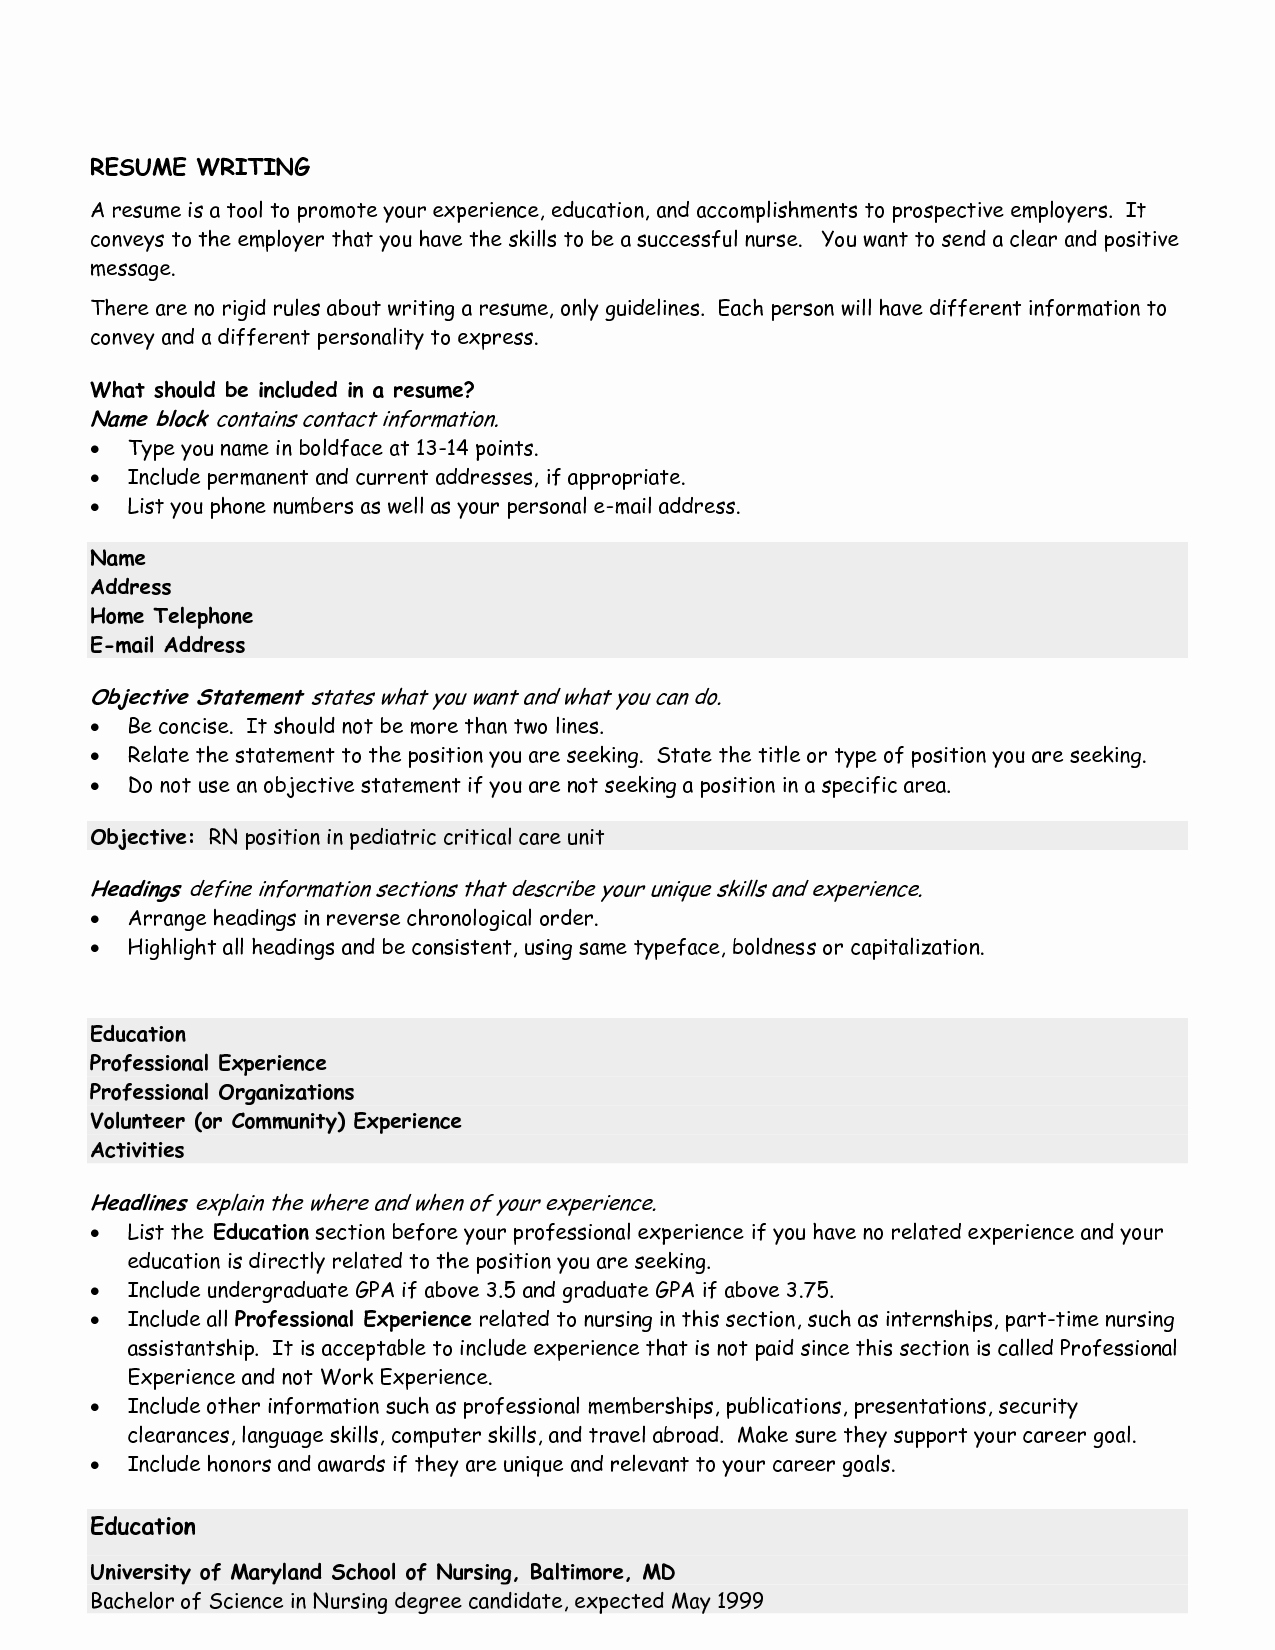 Samples Of Objective On Resume Fresh why Resume Objective is Important